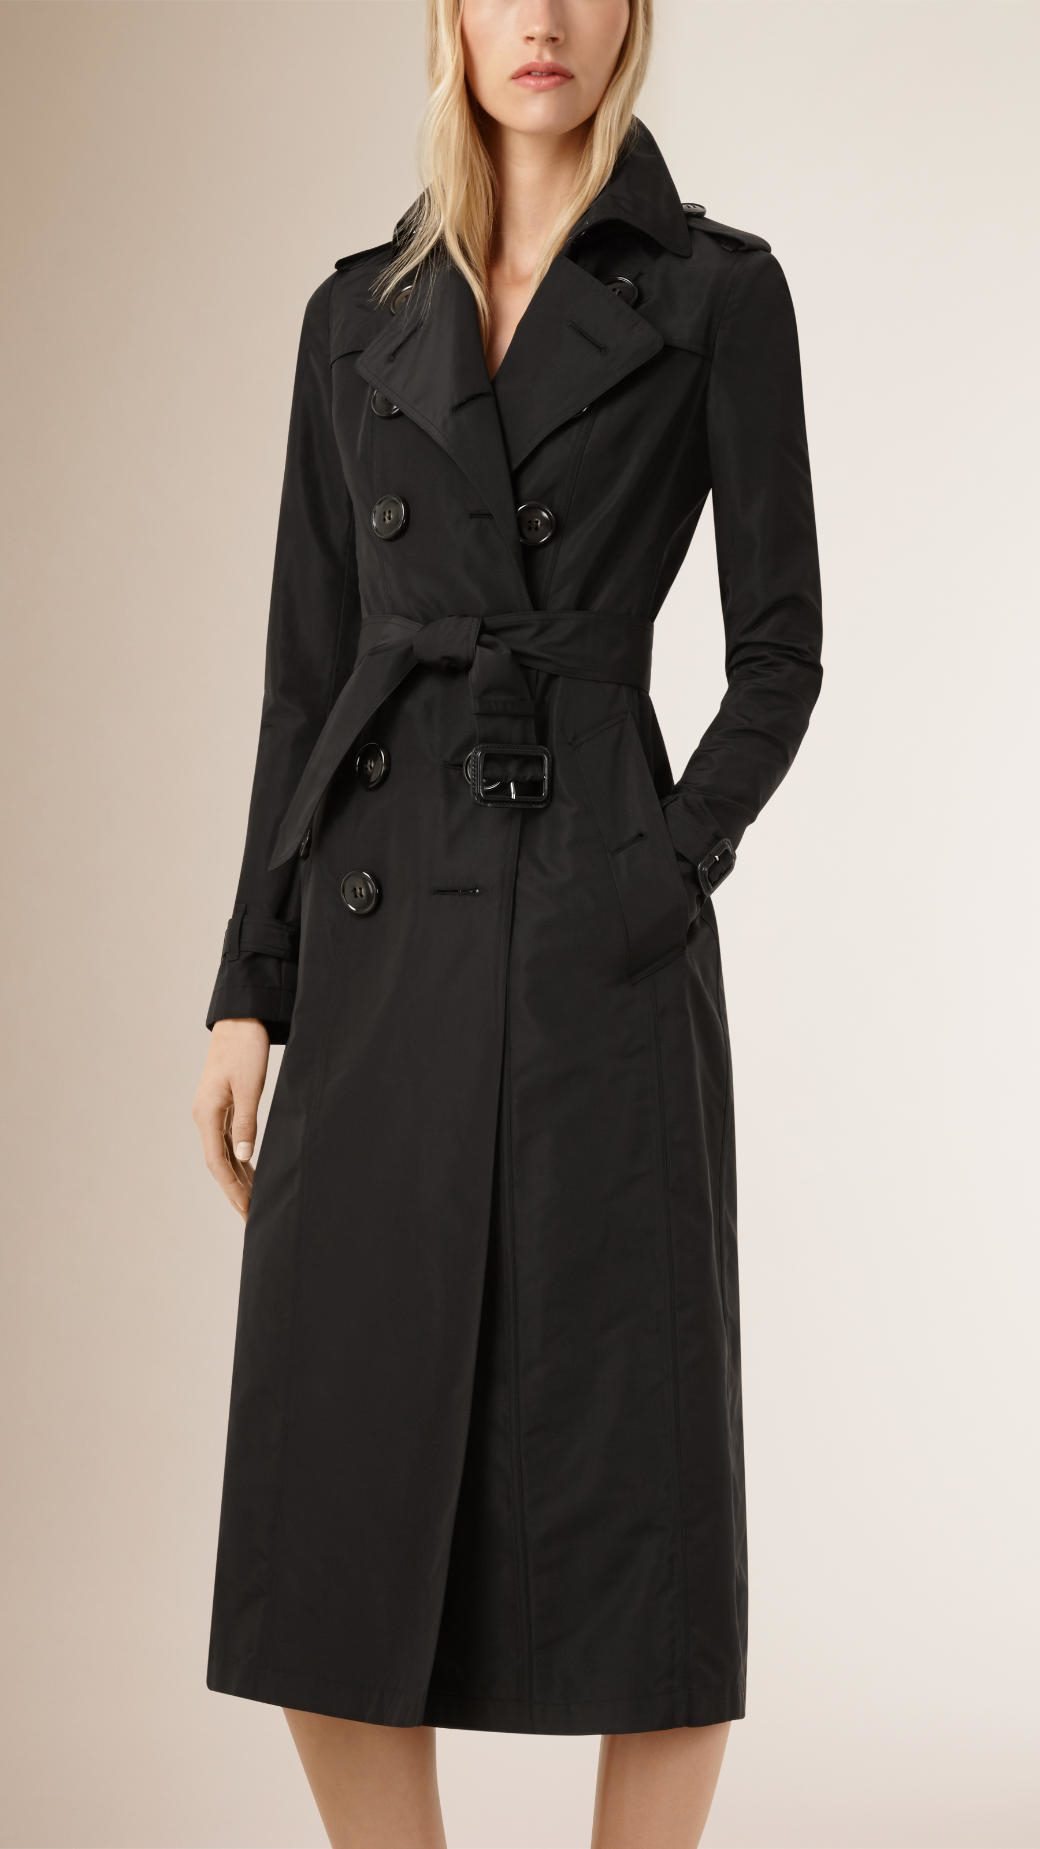 Burberry Silk Trench Coat in Black - Lyst